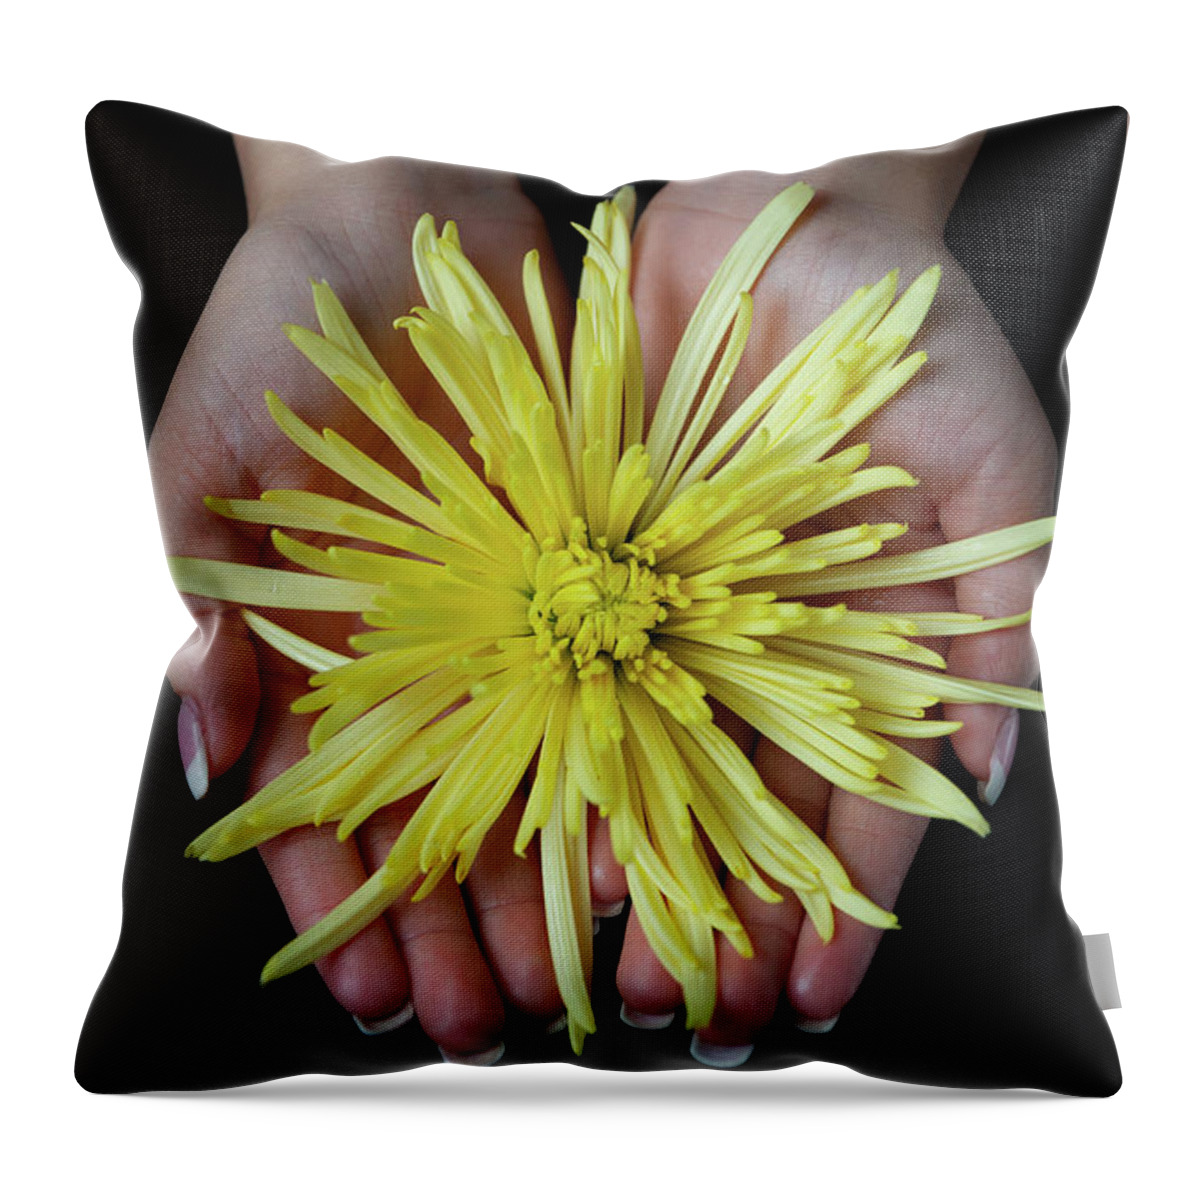 Yoga Throw Pillow featuring the photograph Offering by Marian Tagliarino